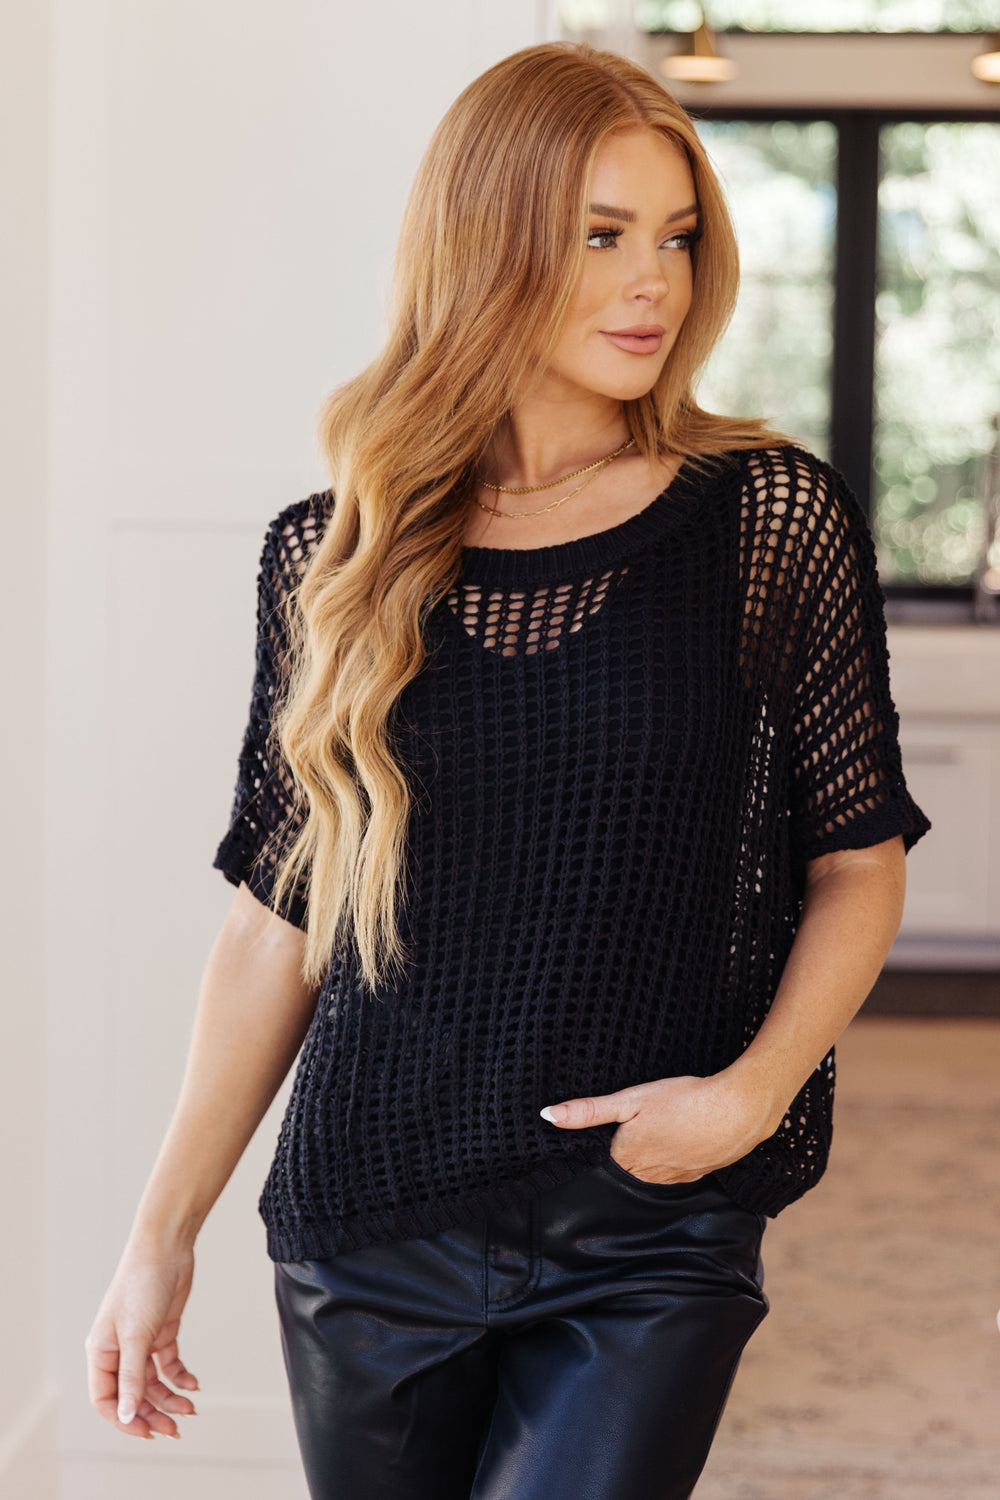 Coastal Dreams Fishnet Top in Black-Short Sleeve Tops-Inspired by Justeen-Women's Clothing Boutique in Chicago, Illinois